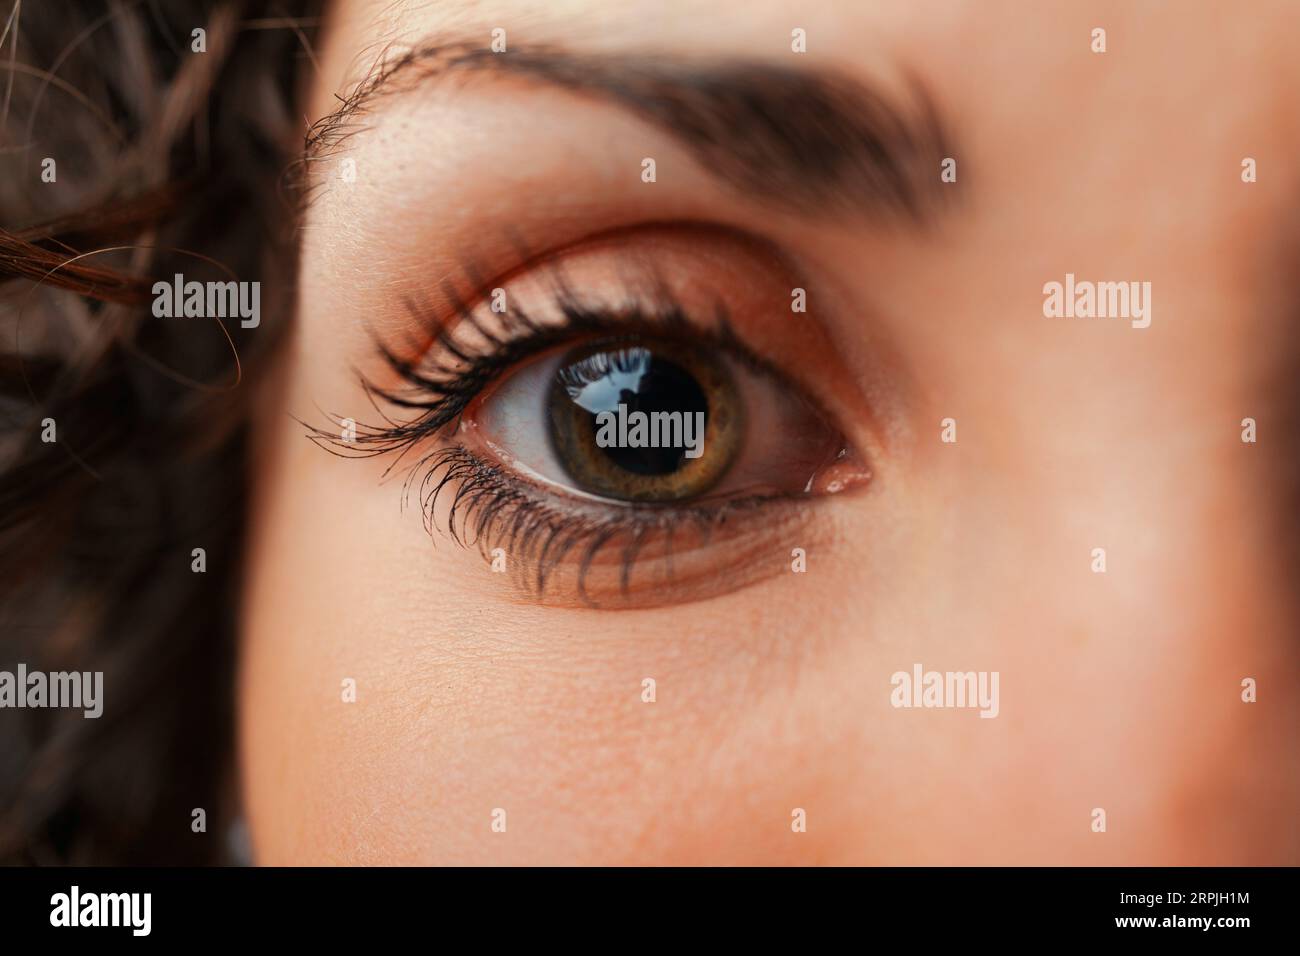 Ultra-close shot of a young woman's eye details. An eye resembling a universe, a star or a black hole capturing all light, yet drawing us in as if emi Stock Photo